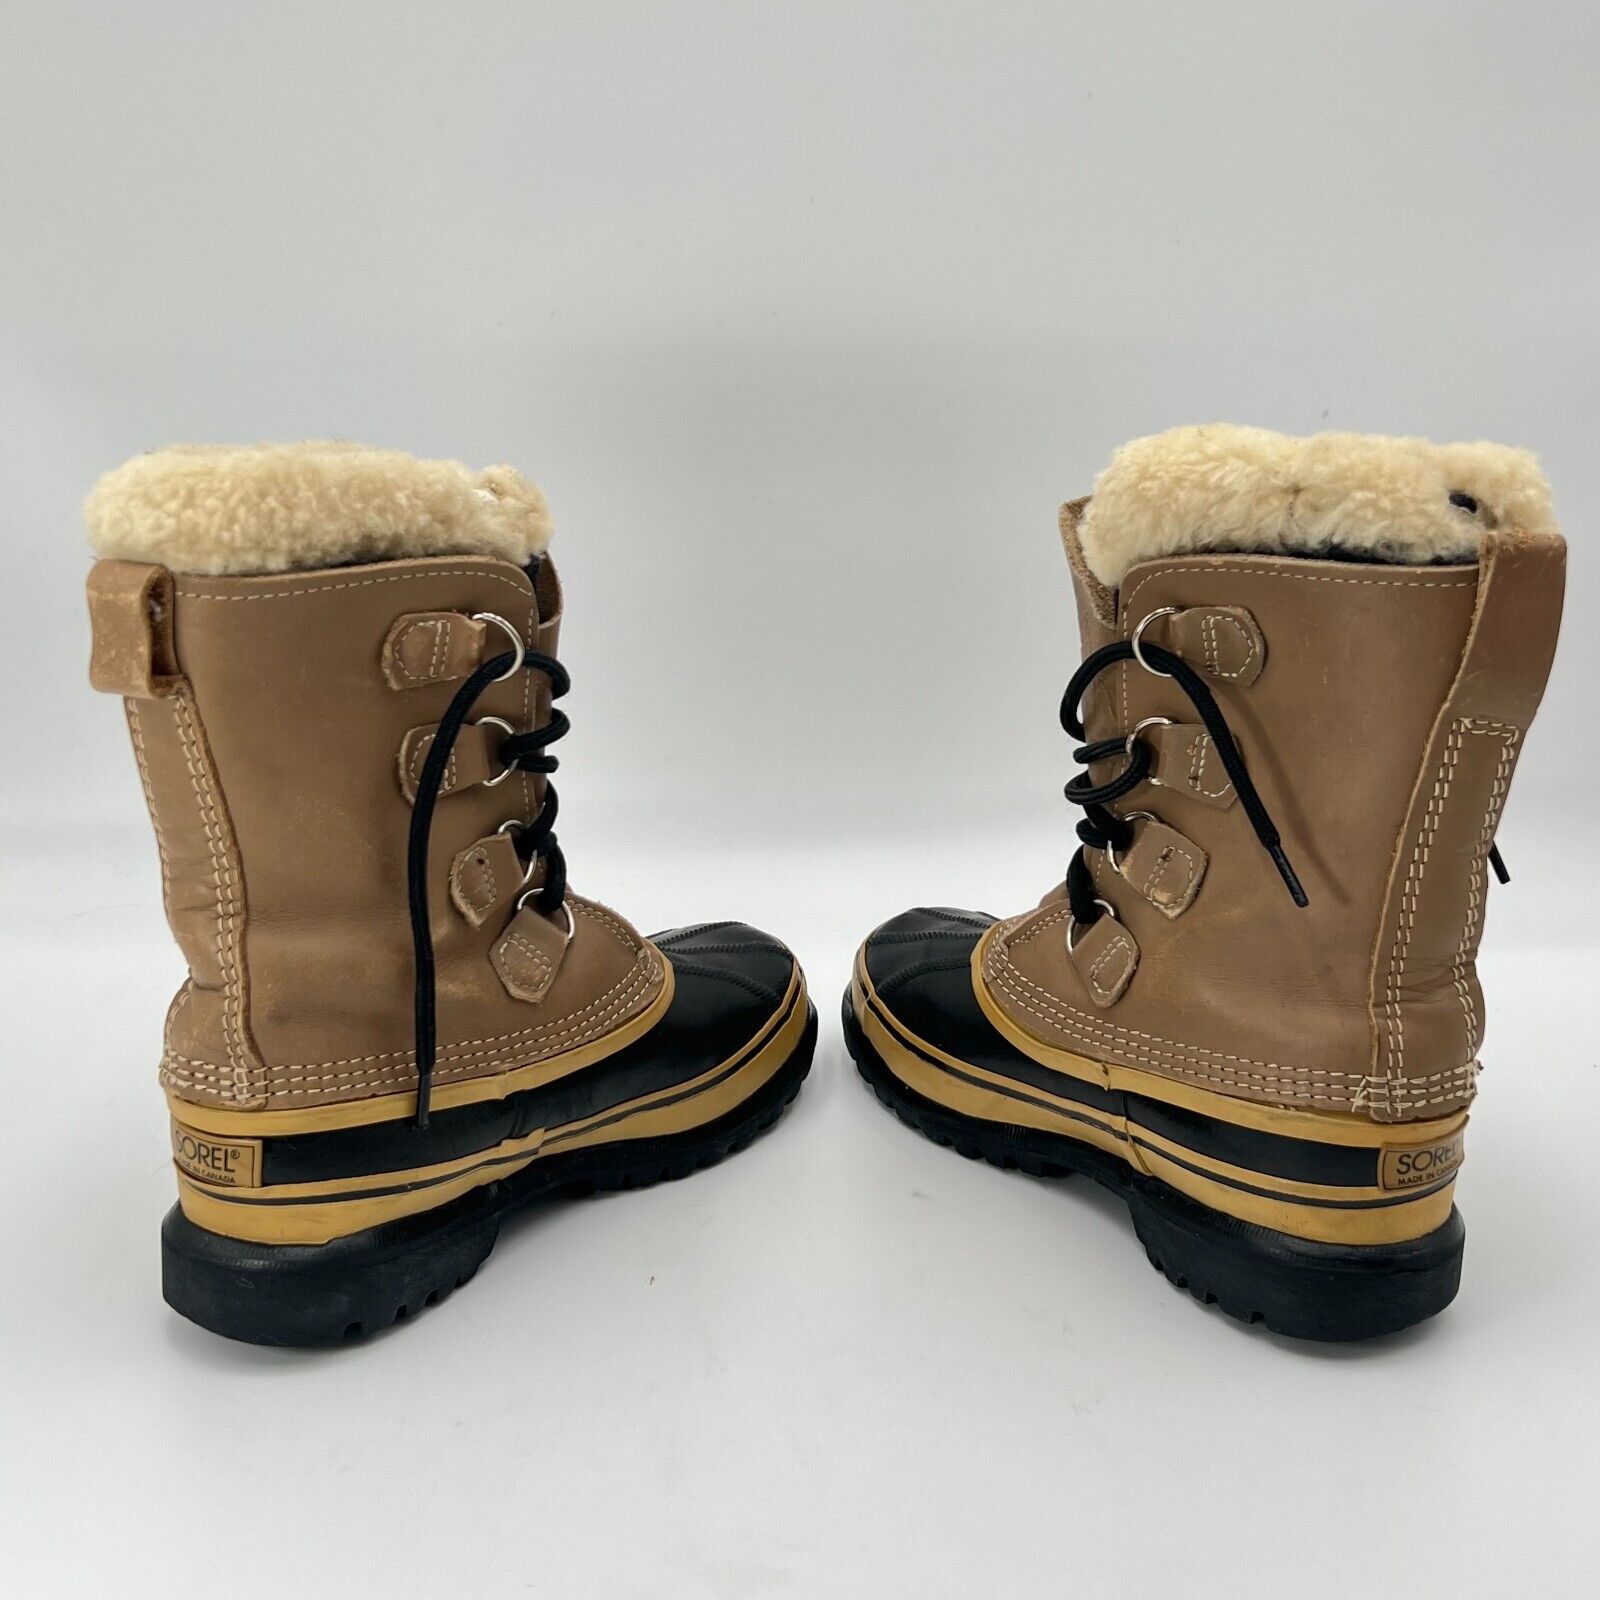 Sorel Caribou Brown Canadian Leather Rubber Wool Lined Winter Boots Womens Size